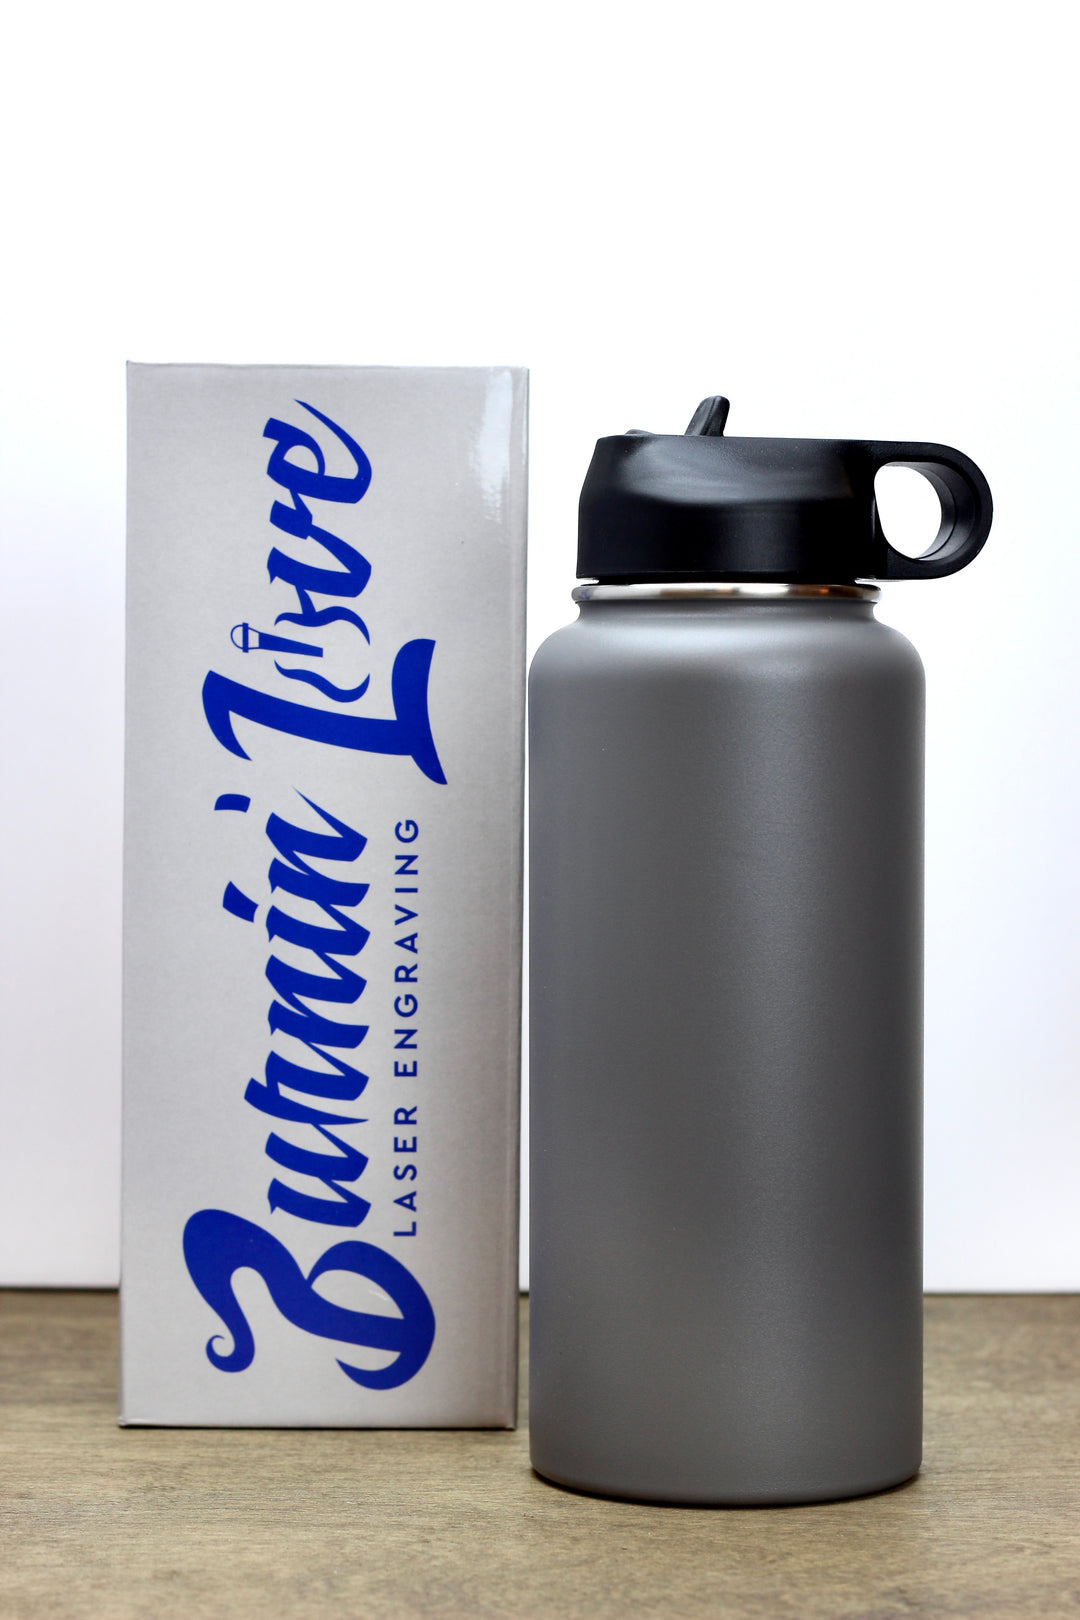 Personalized 16 oz RTIC Stainless Steel Water Bottles